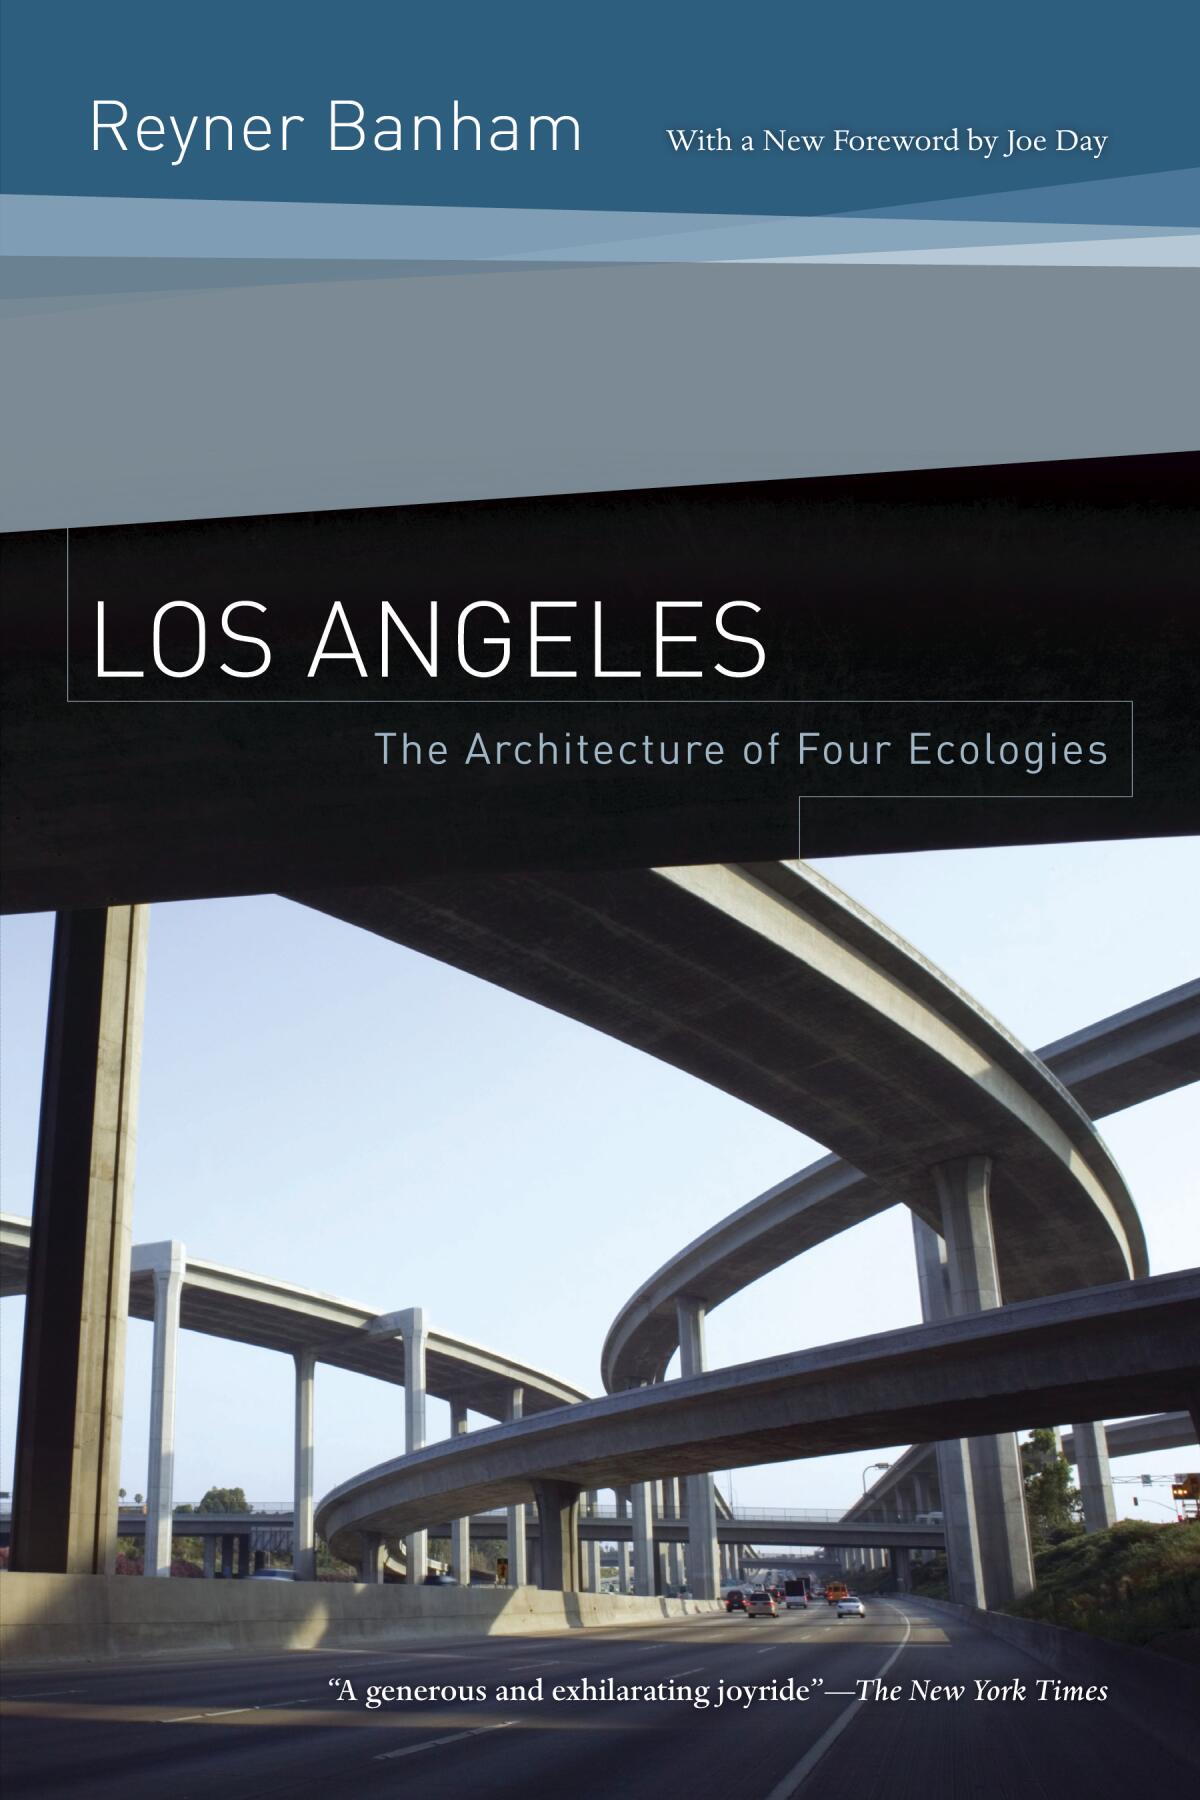 "Los Angeles: The Architecture of Four Ecologies" by Reyner Banham